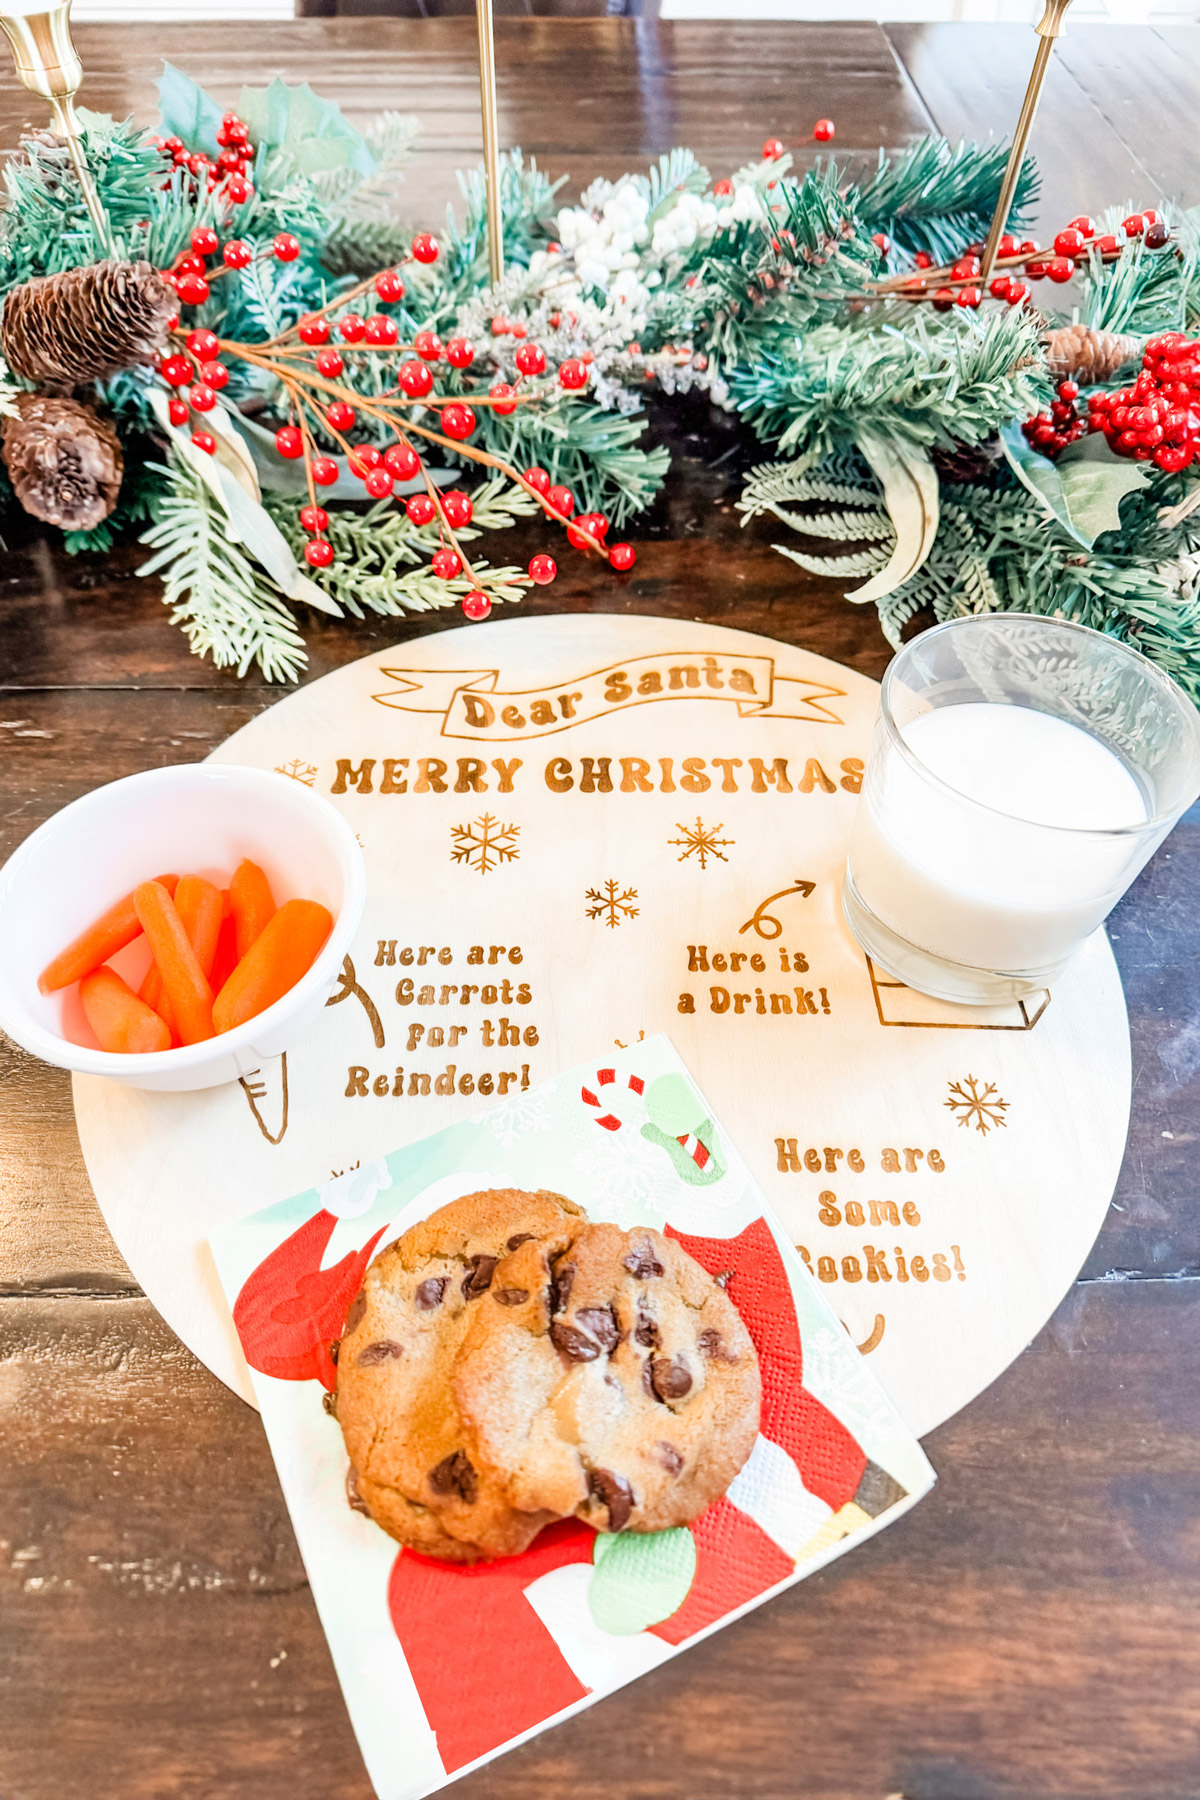 This is an image of a Santa cookie tray using the free Santa tray SVG you can get in this post.